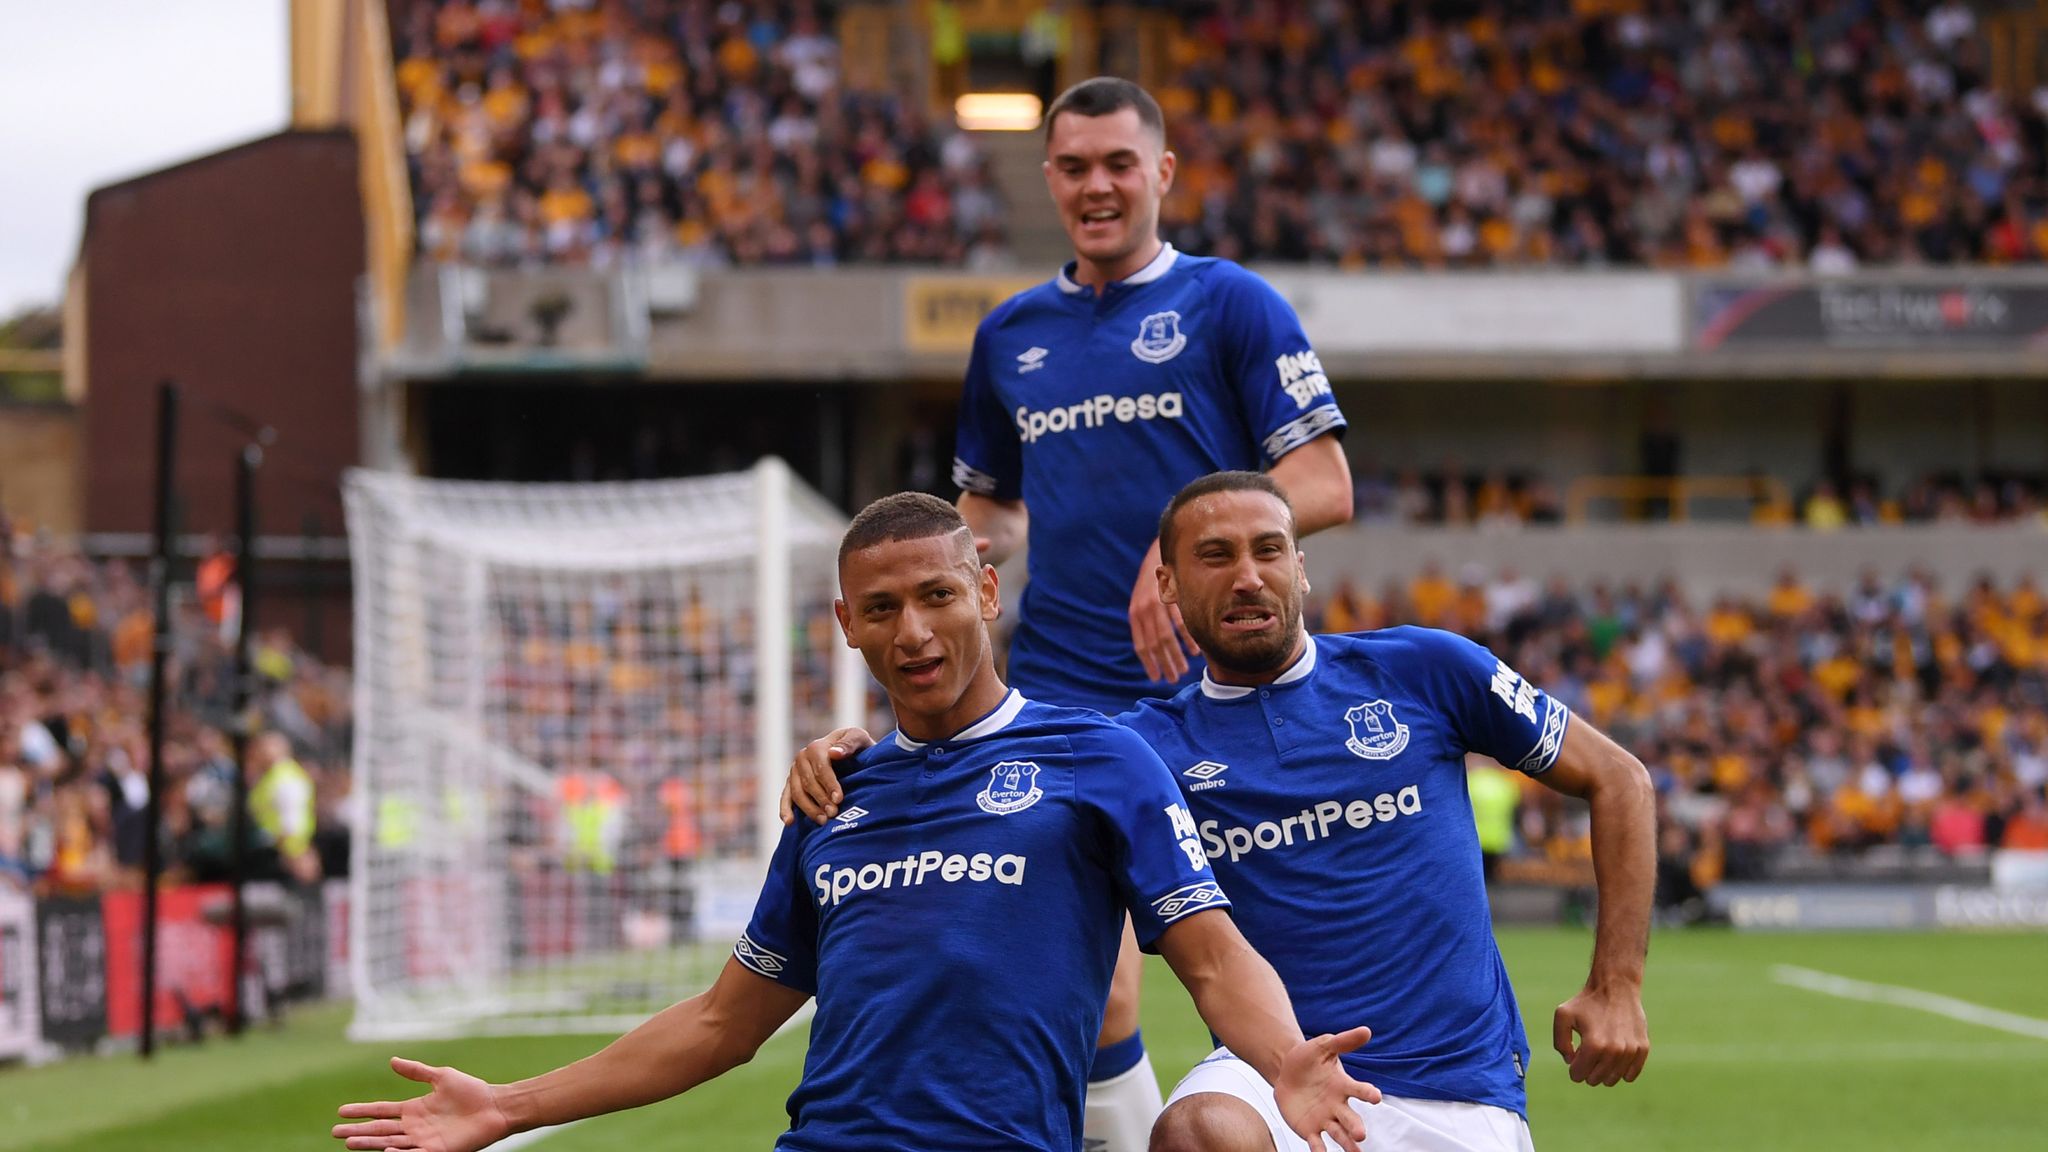 Lift-off for Richarlison as Brazilian inspires dramatic win ahead